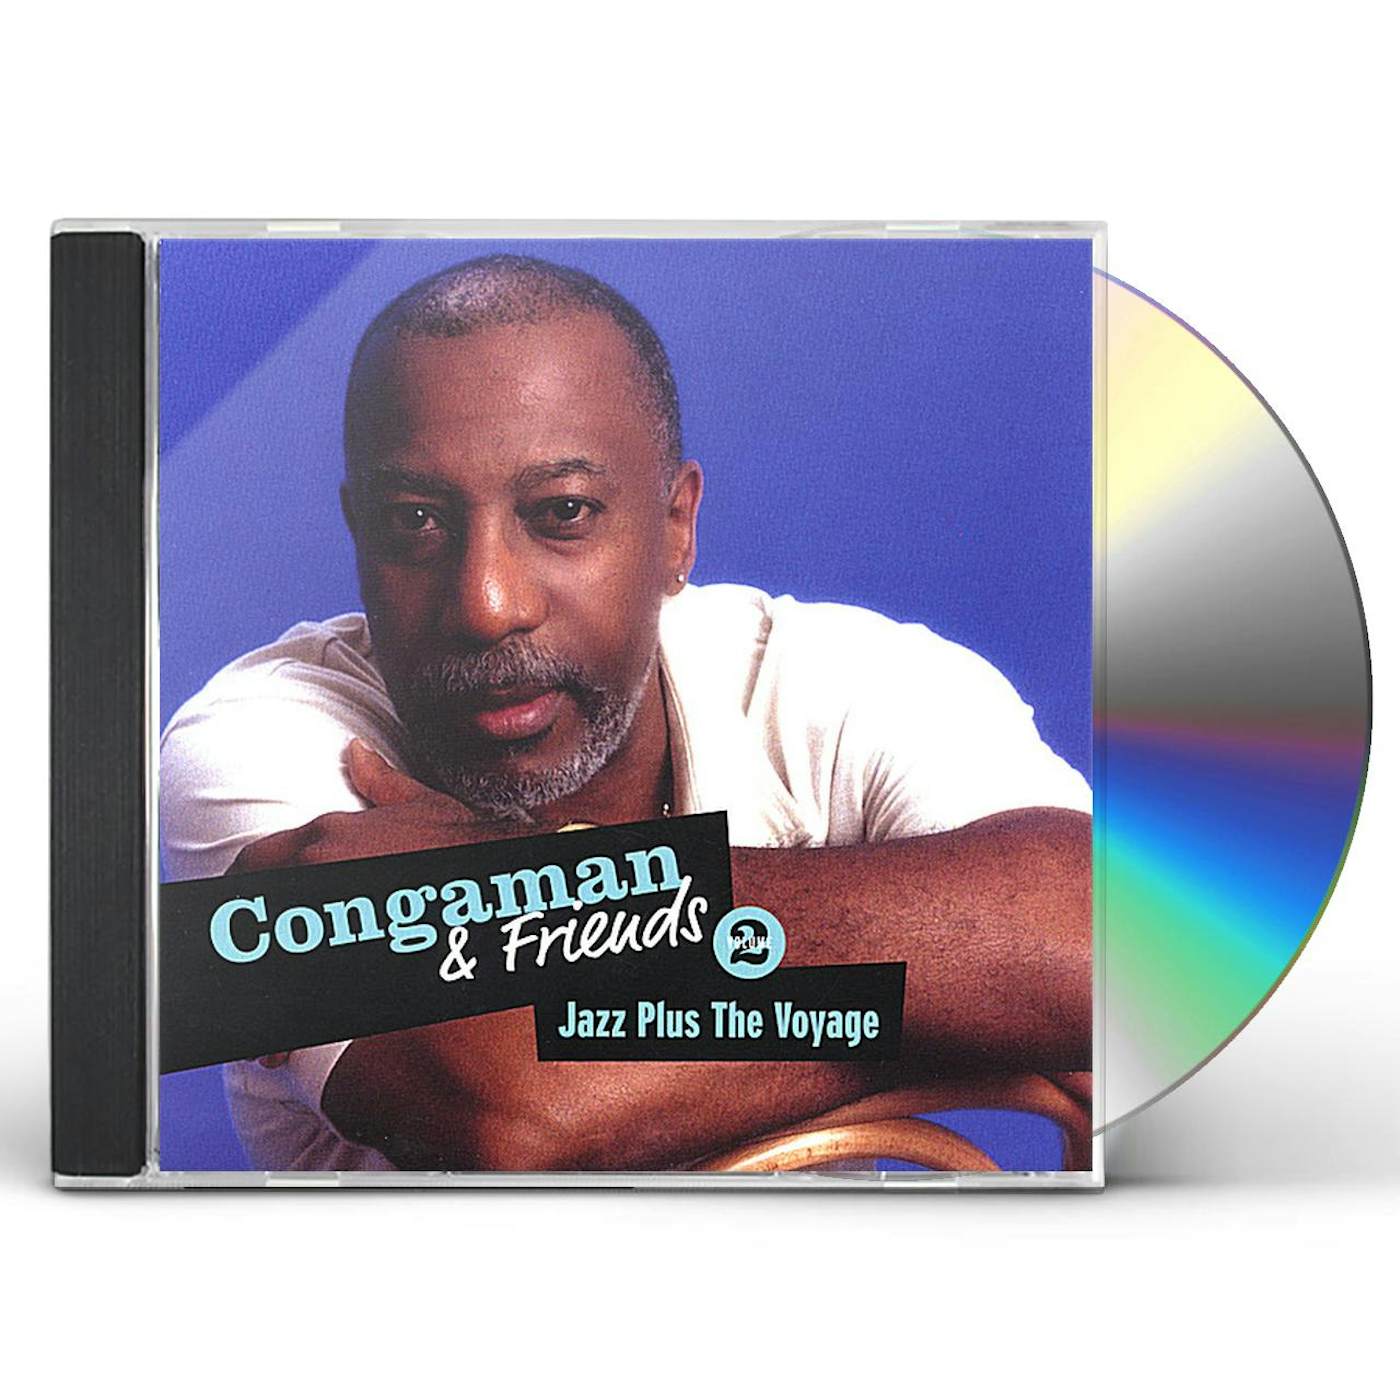 CONGAMAN & FRIENDS-JAZZ PLUS THE VOYAGE 2 CD